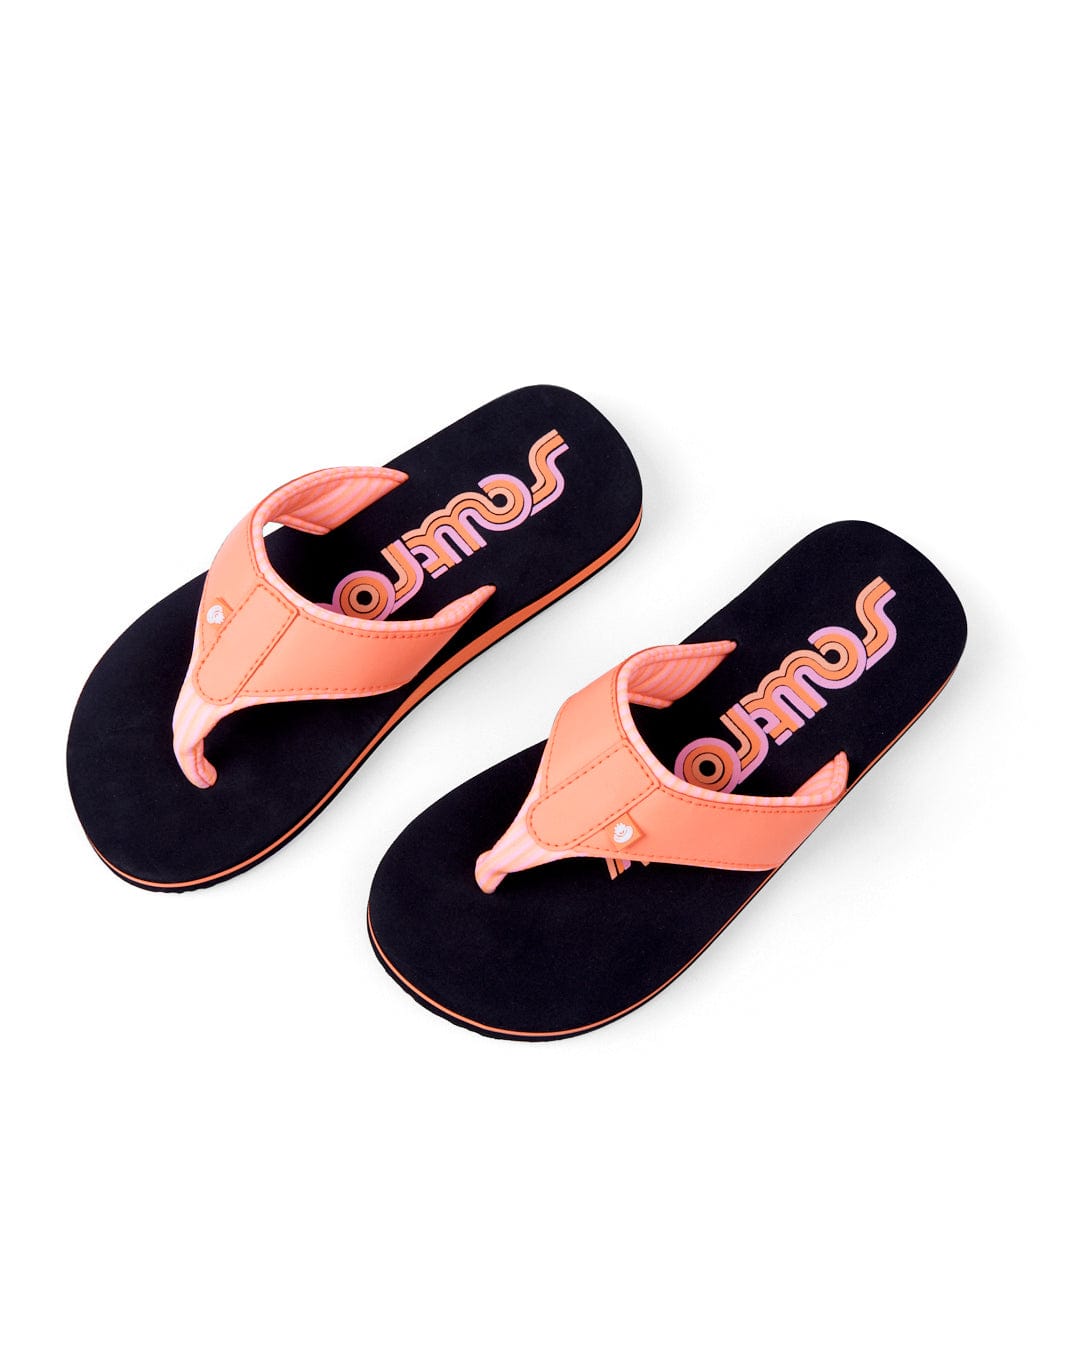 A pair of Saltrock Cora Retro - Womens Flip Flops in Black/Peach with an ergonomic upper and the word "summer" printed on the insole, isolated on a white background.